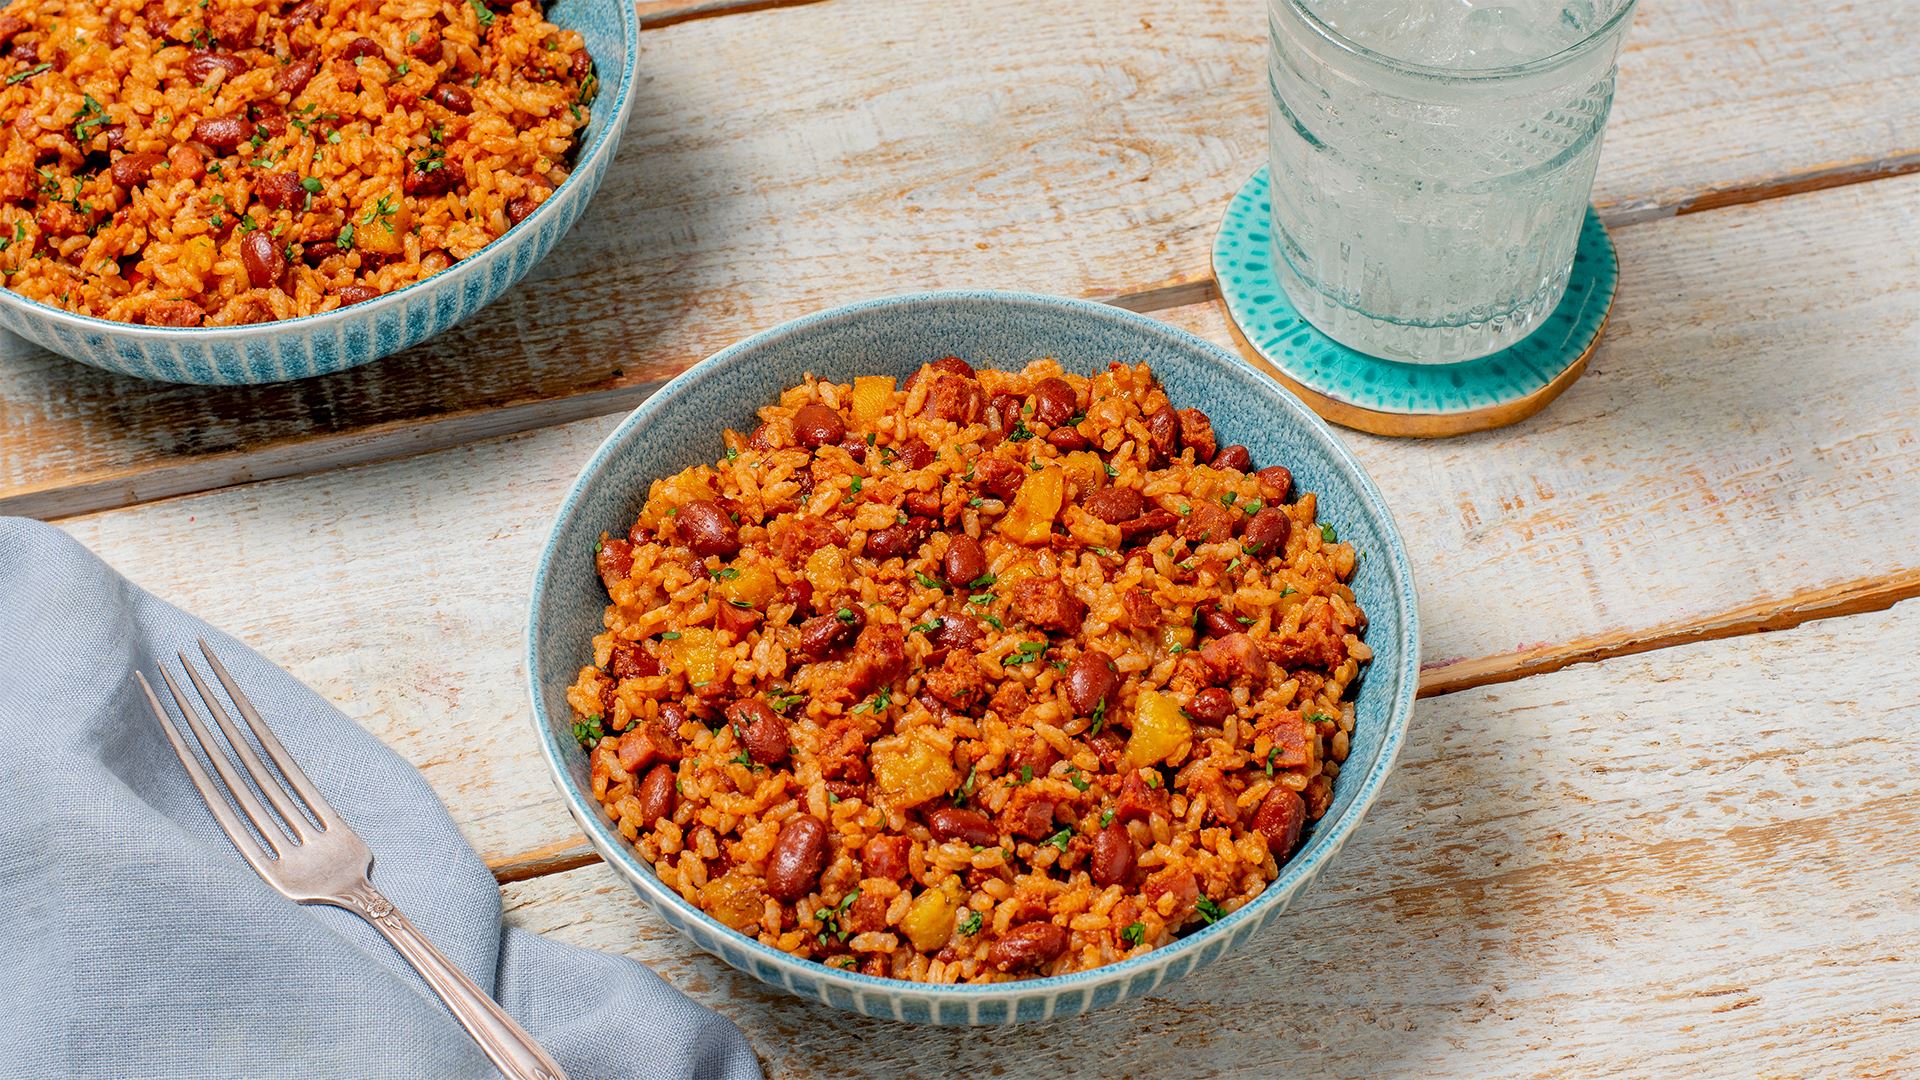 https://www.goya.com/media/8091/mamposteao-puerto-rican-style-rice-and-beans.jpg?quality=80